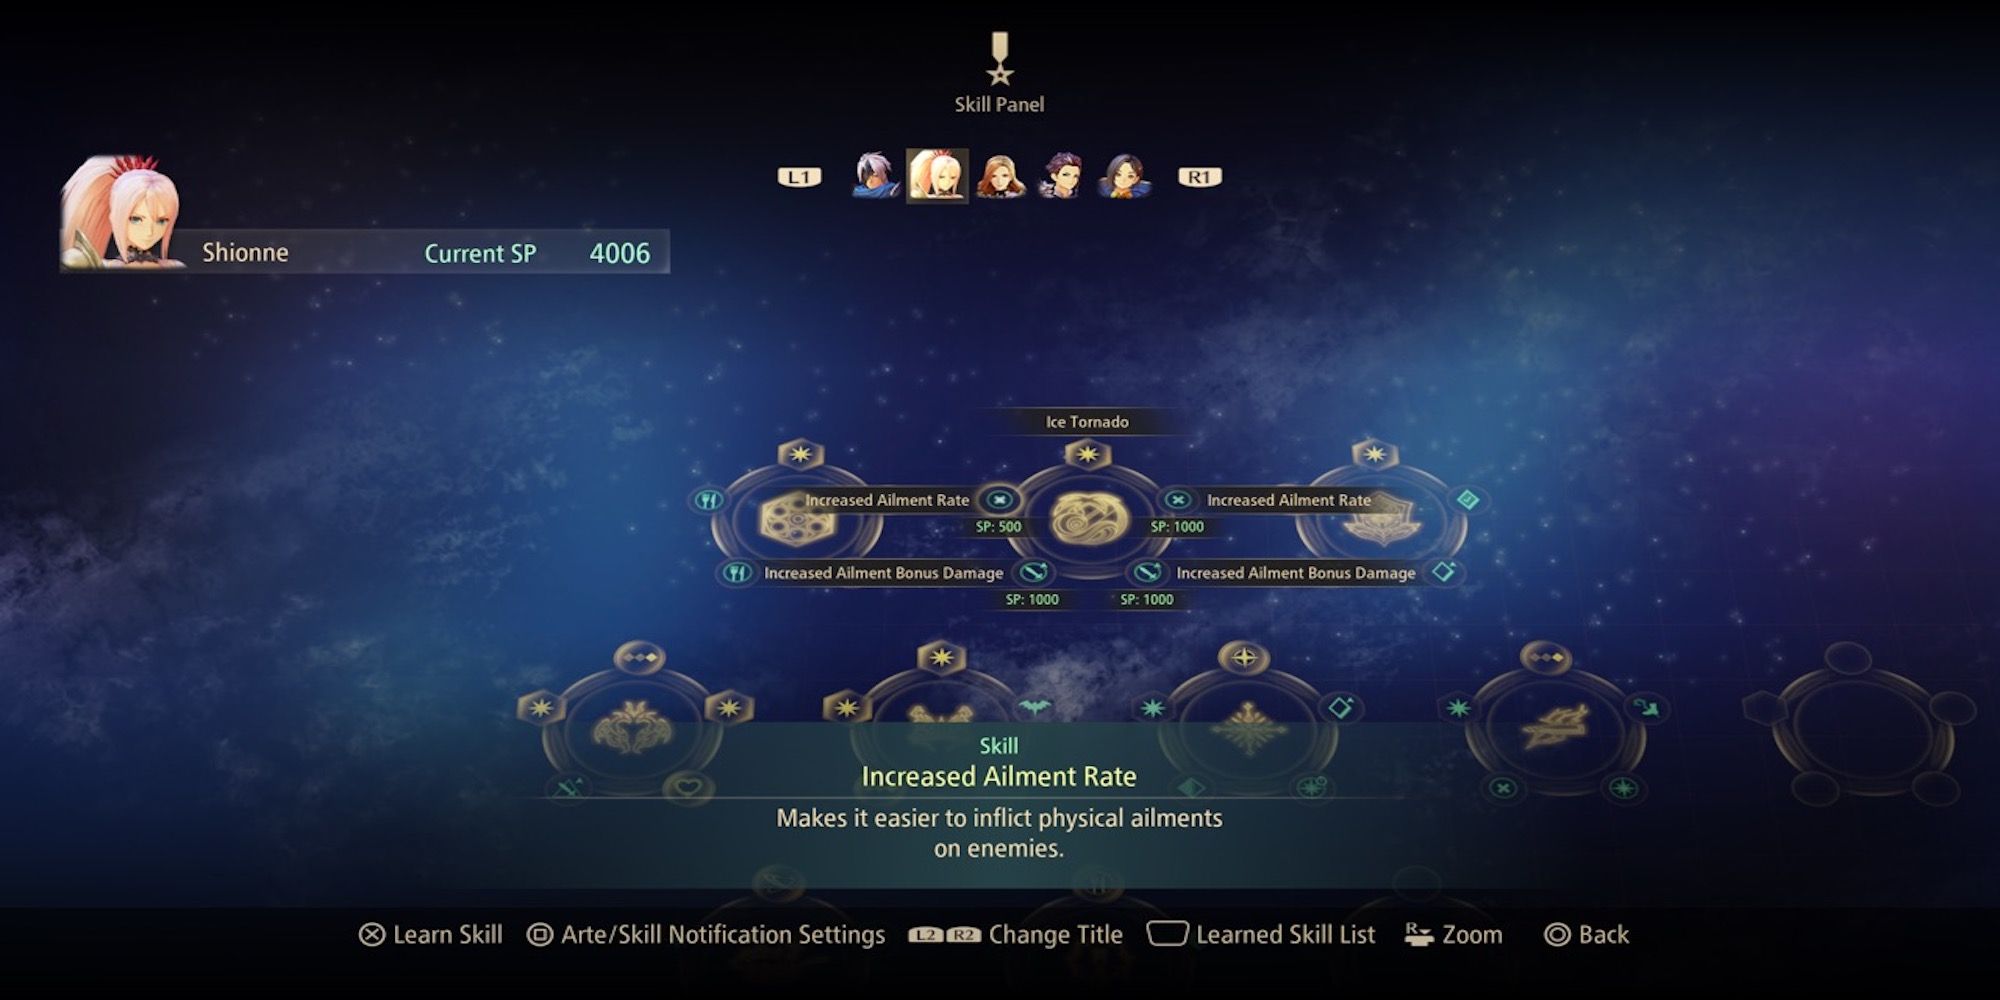 Increased Ailment Rate skill in skill menu from Tales of Arise